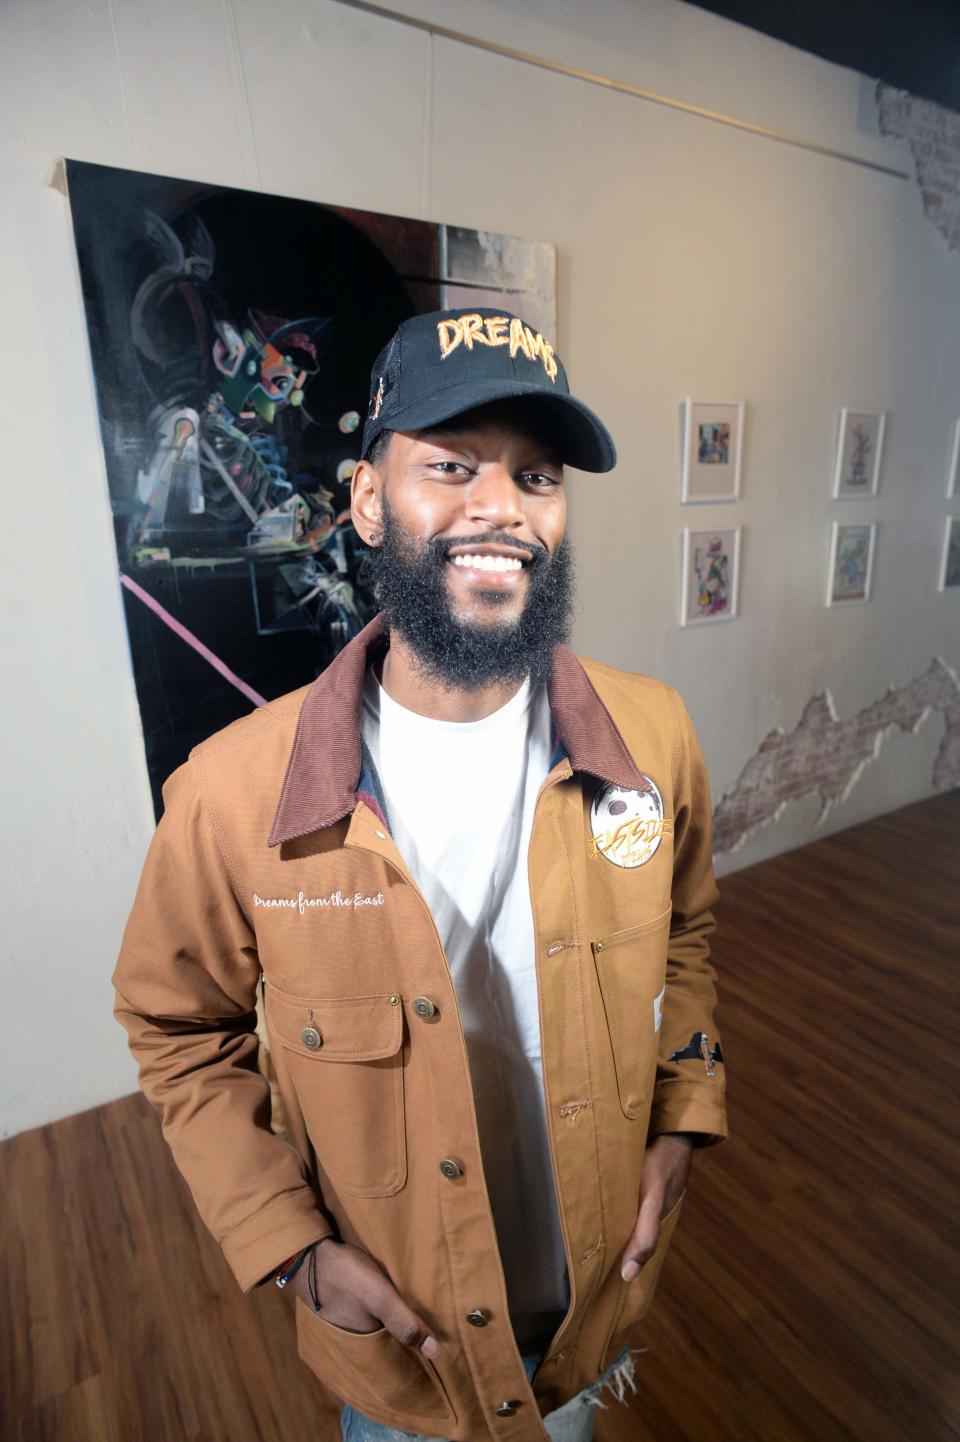 Freddie Mendes of Brockton, founder of Dreams from the East, a streetwear company, stops by his friend Ryan Jones’ tattoo studio, Real Art Studios, at 31MainSt. In Taunton April  29, 2022.